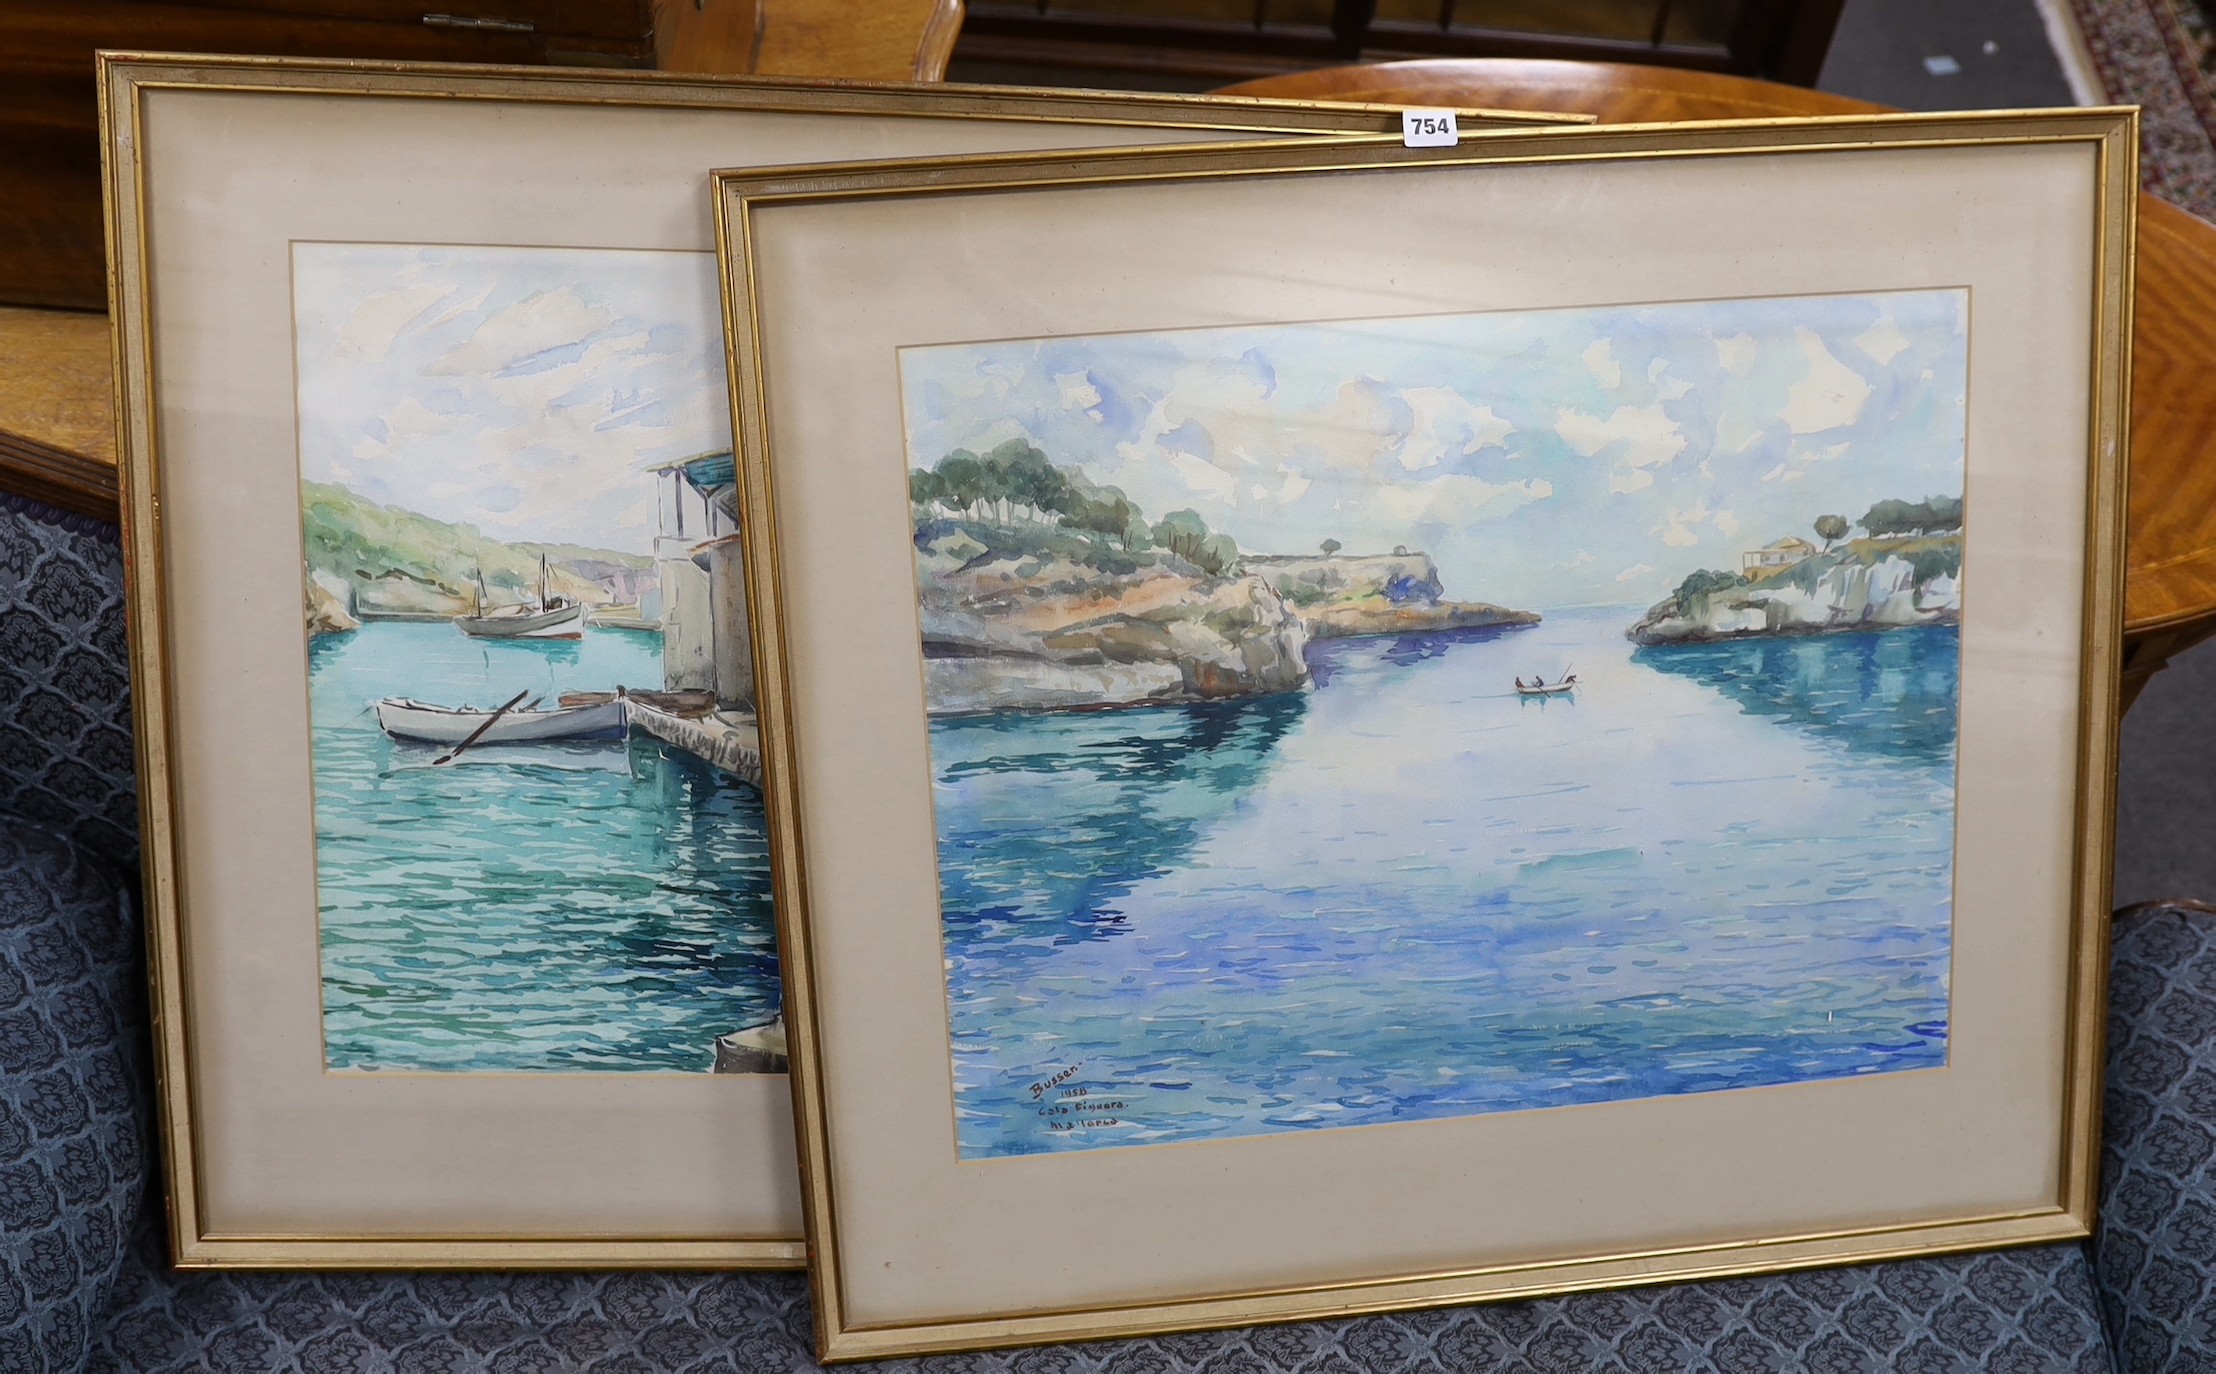 Busser, two watercolours, 'Cala Figuera, Mallorca', signed and dated 1958, 50 x 64cm                                                                                                                                        